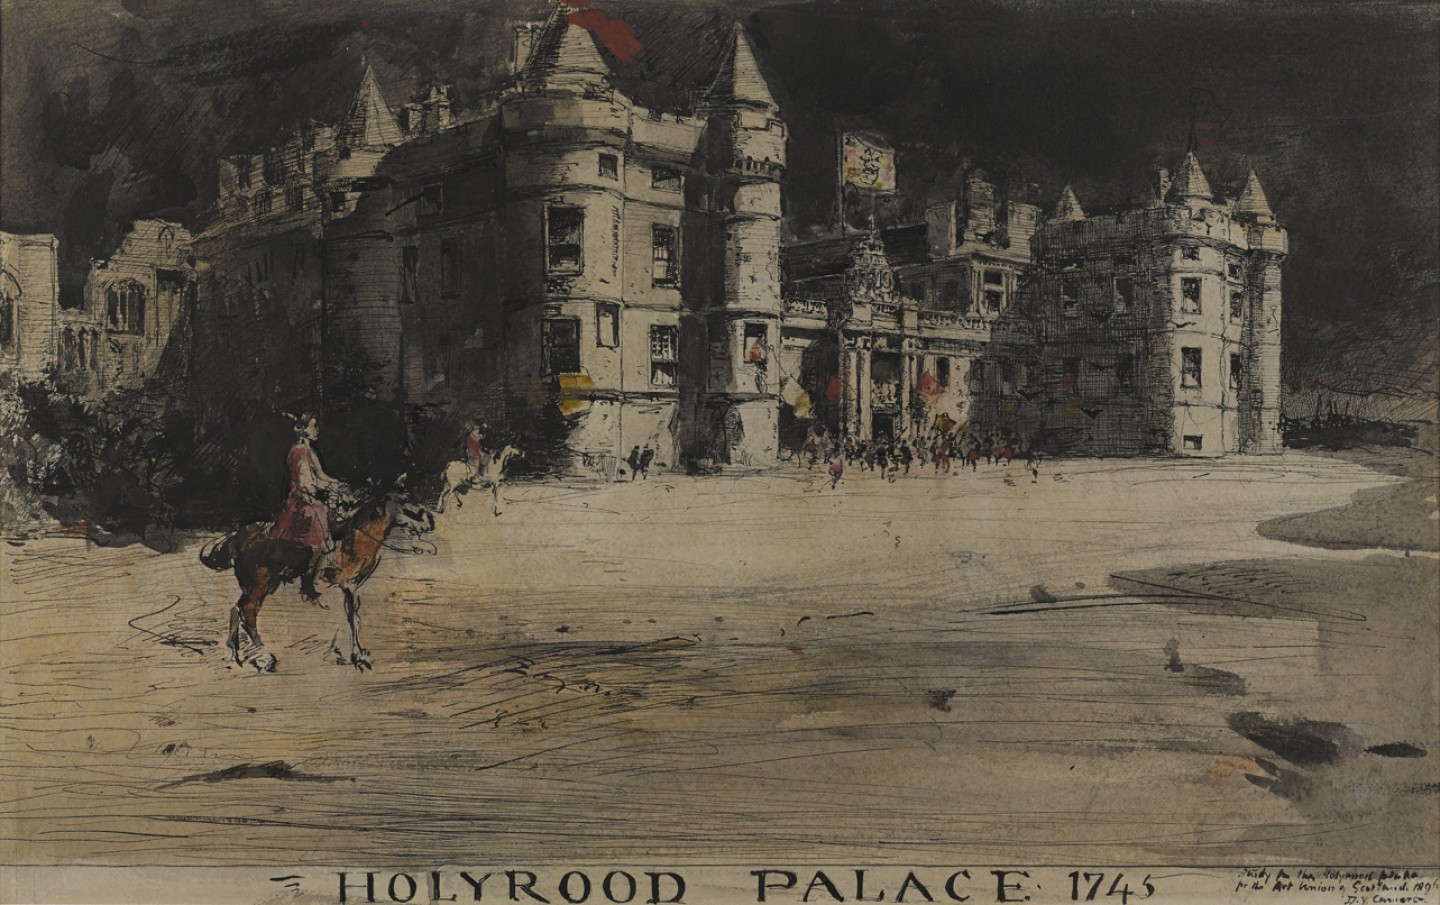 Holyrood Palace in 1765